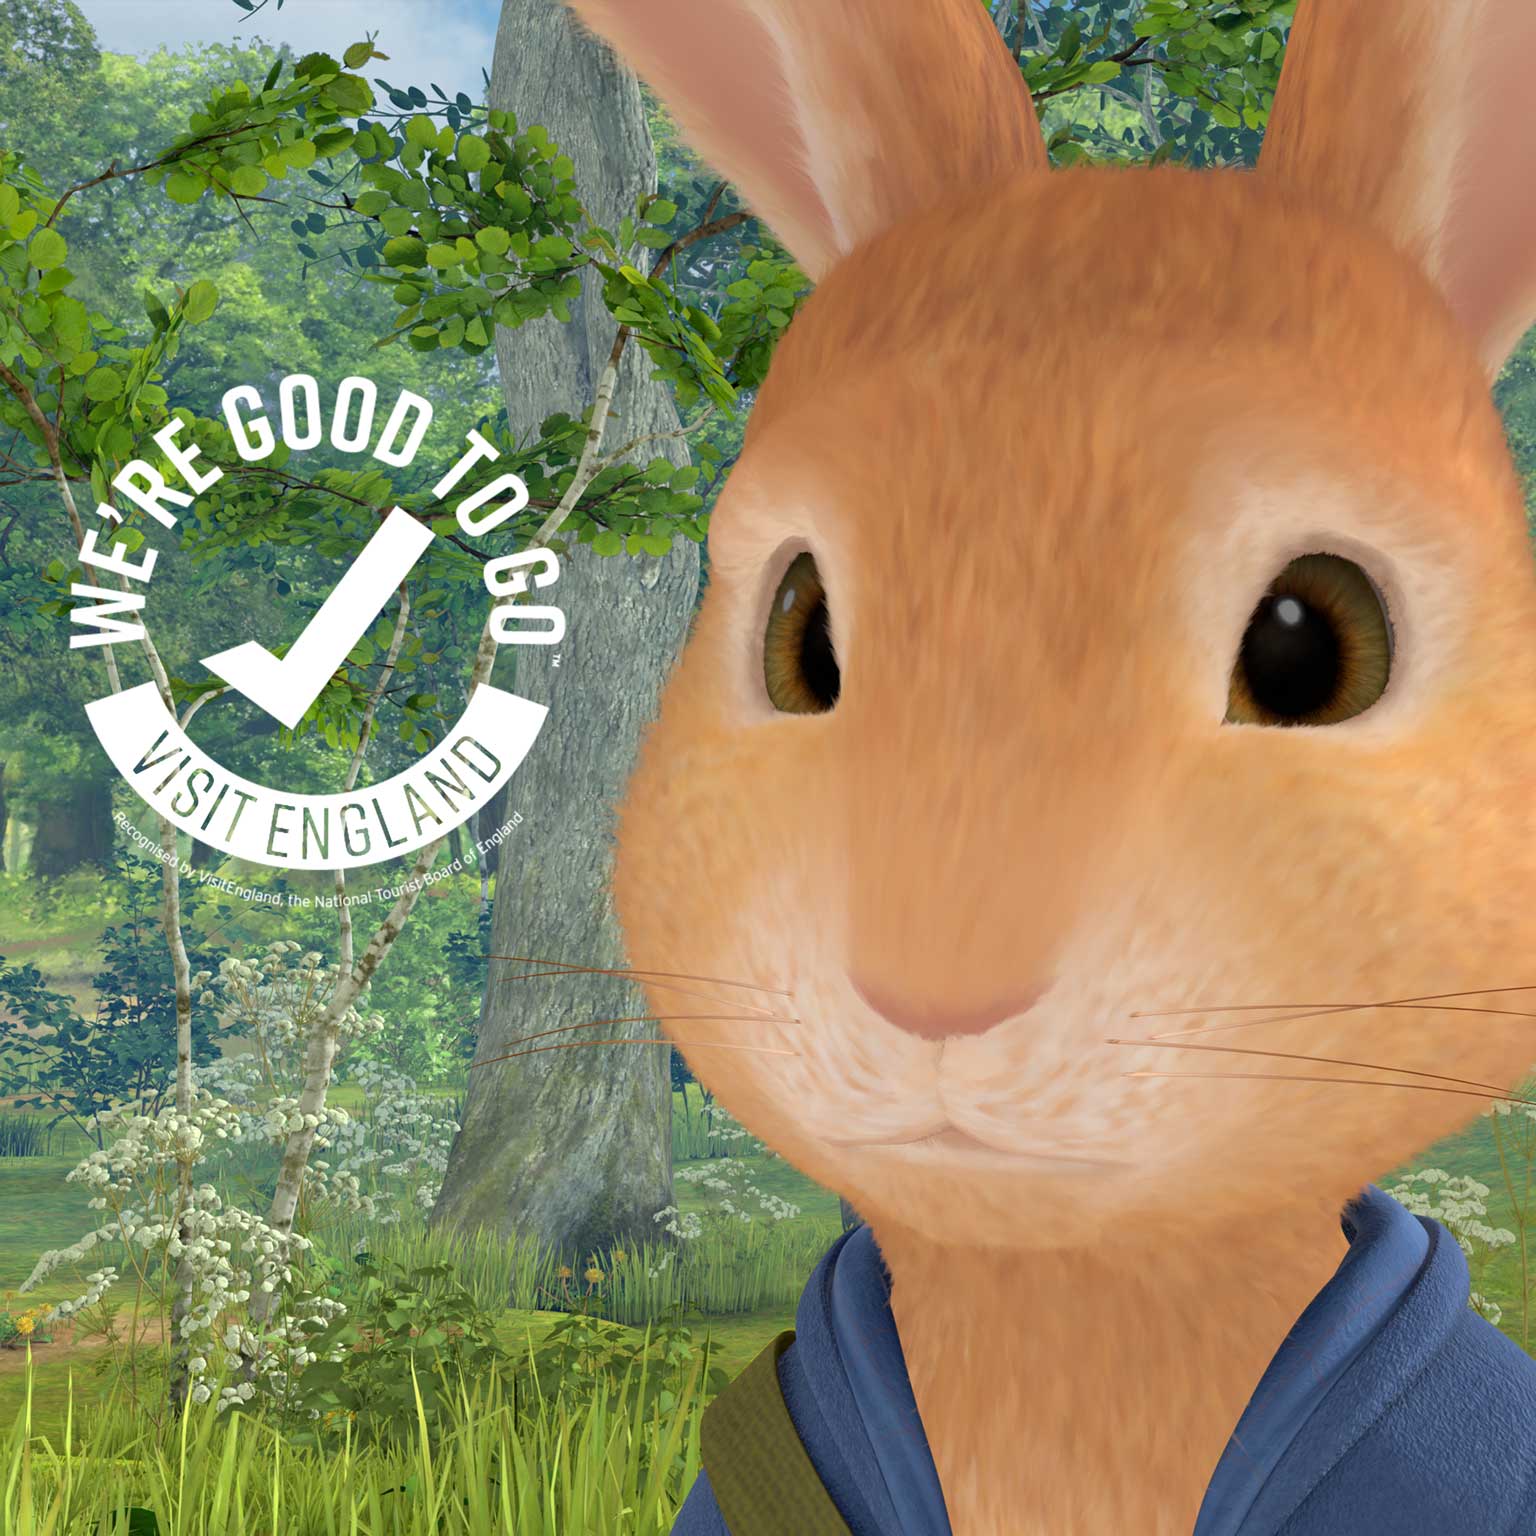 Peter Rabbit Explore and Play Good to Go attraction